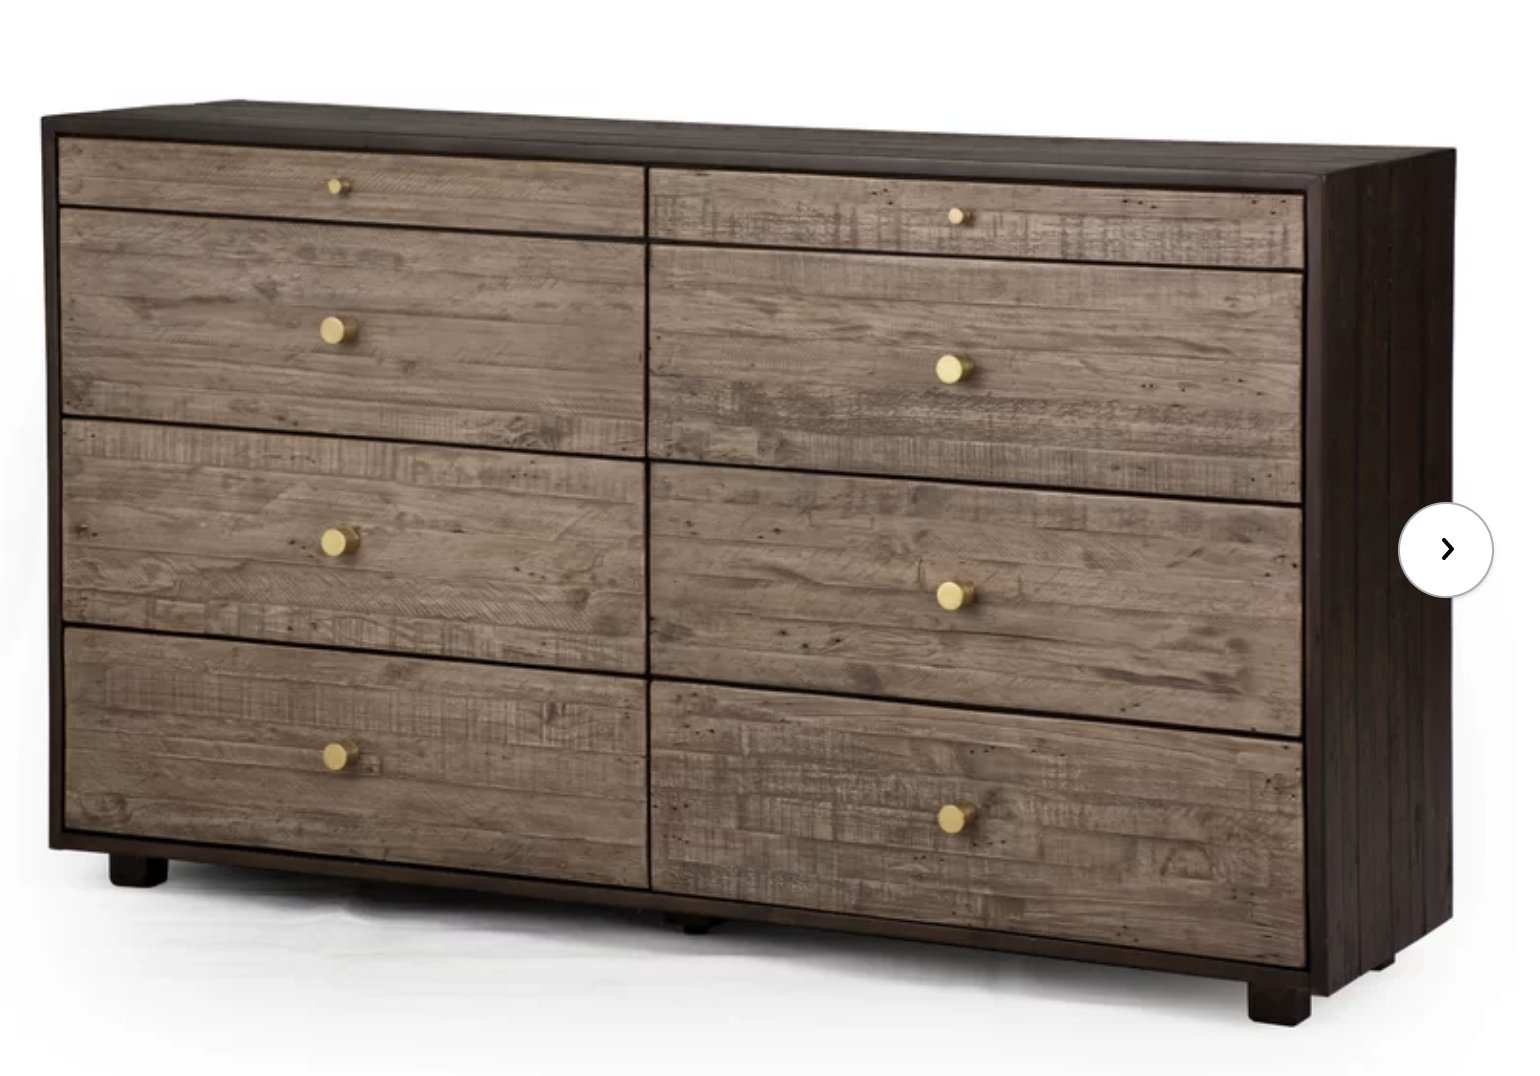 BROWN CALAIS 8 DRAWER DOUBLE DRESSER - Image 0